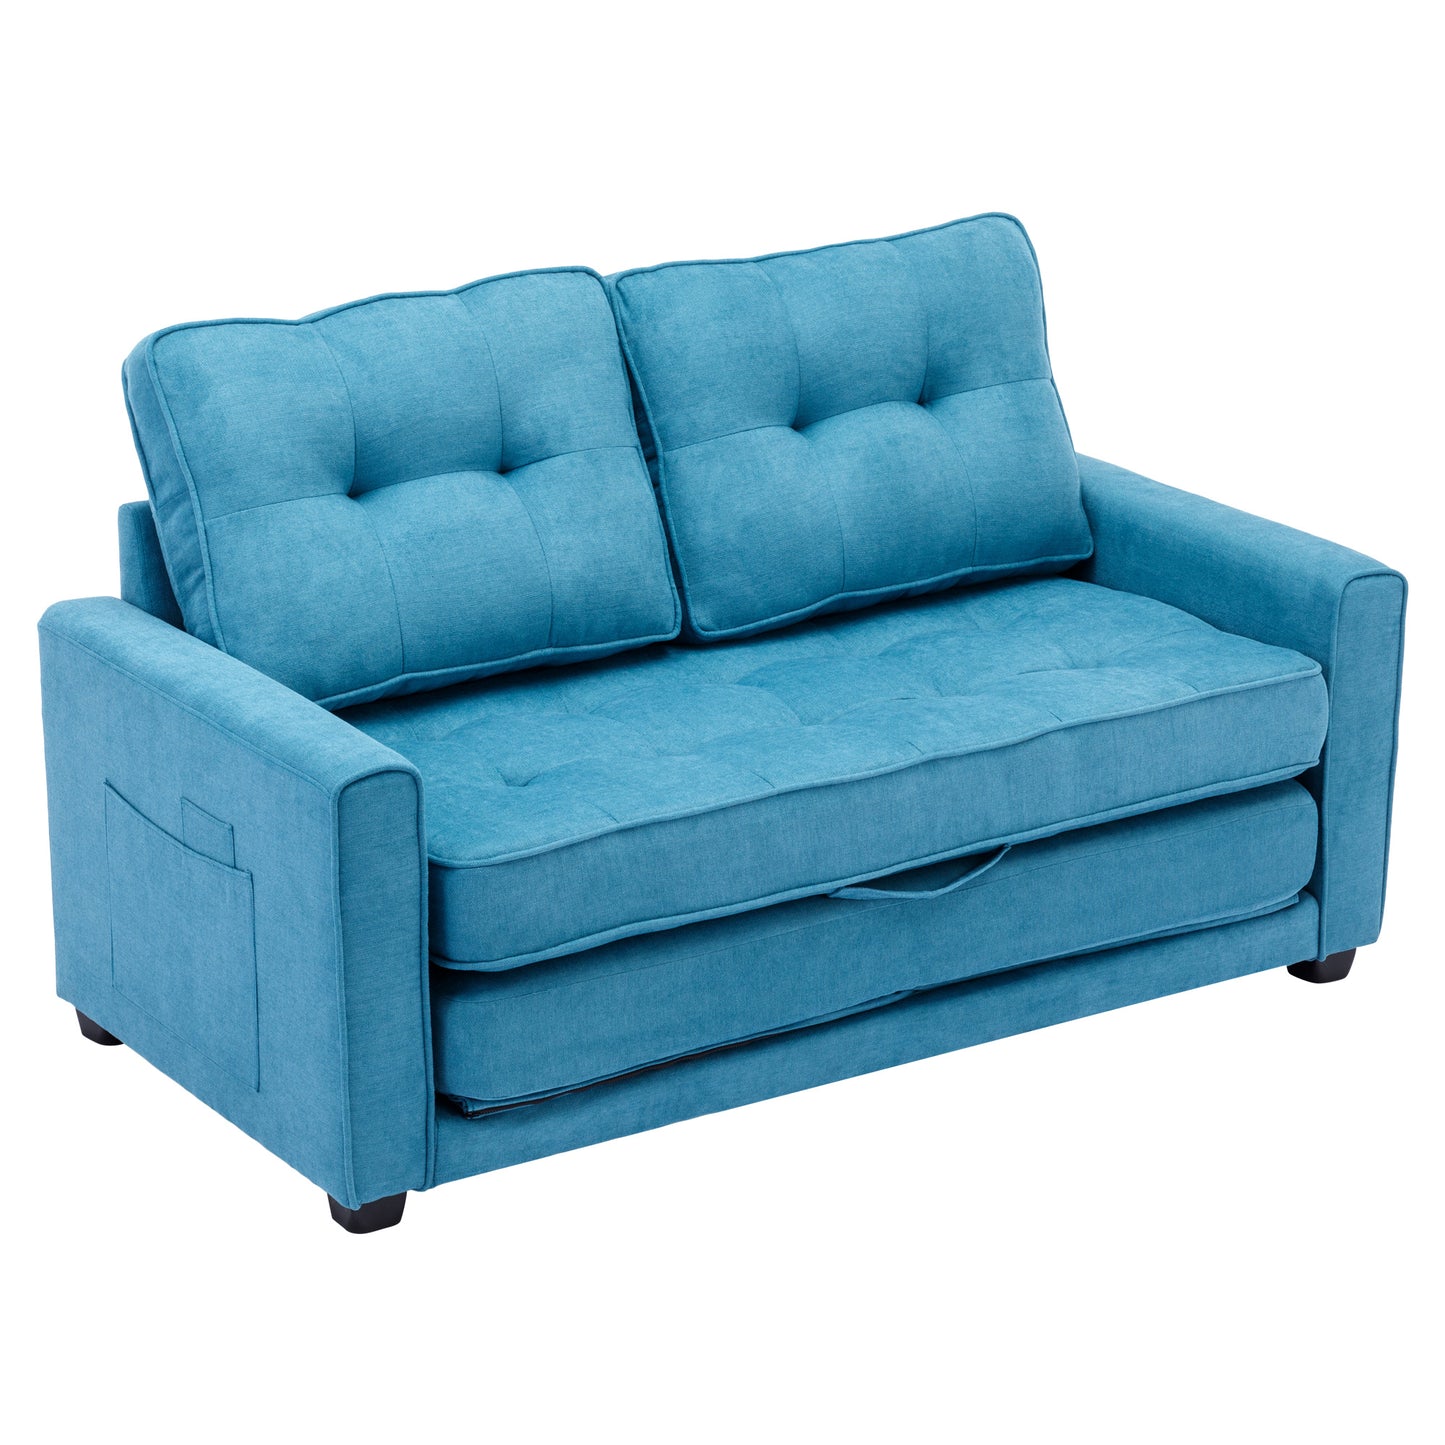 59.4" Loveseat Sofa with Pull-Out Bed Modern Upholstered Couch with Side Pocket for Living Room Office, Blue